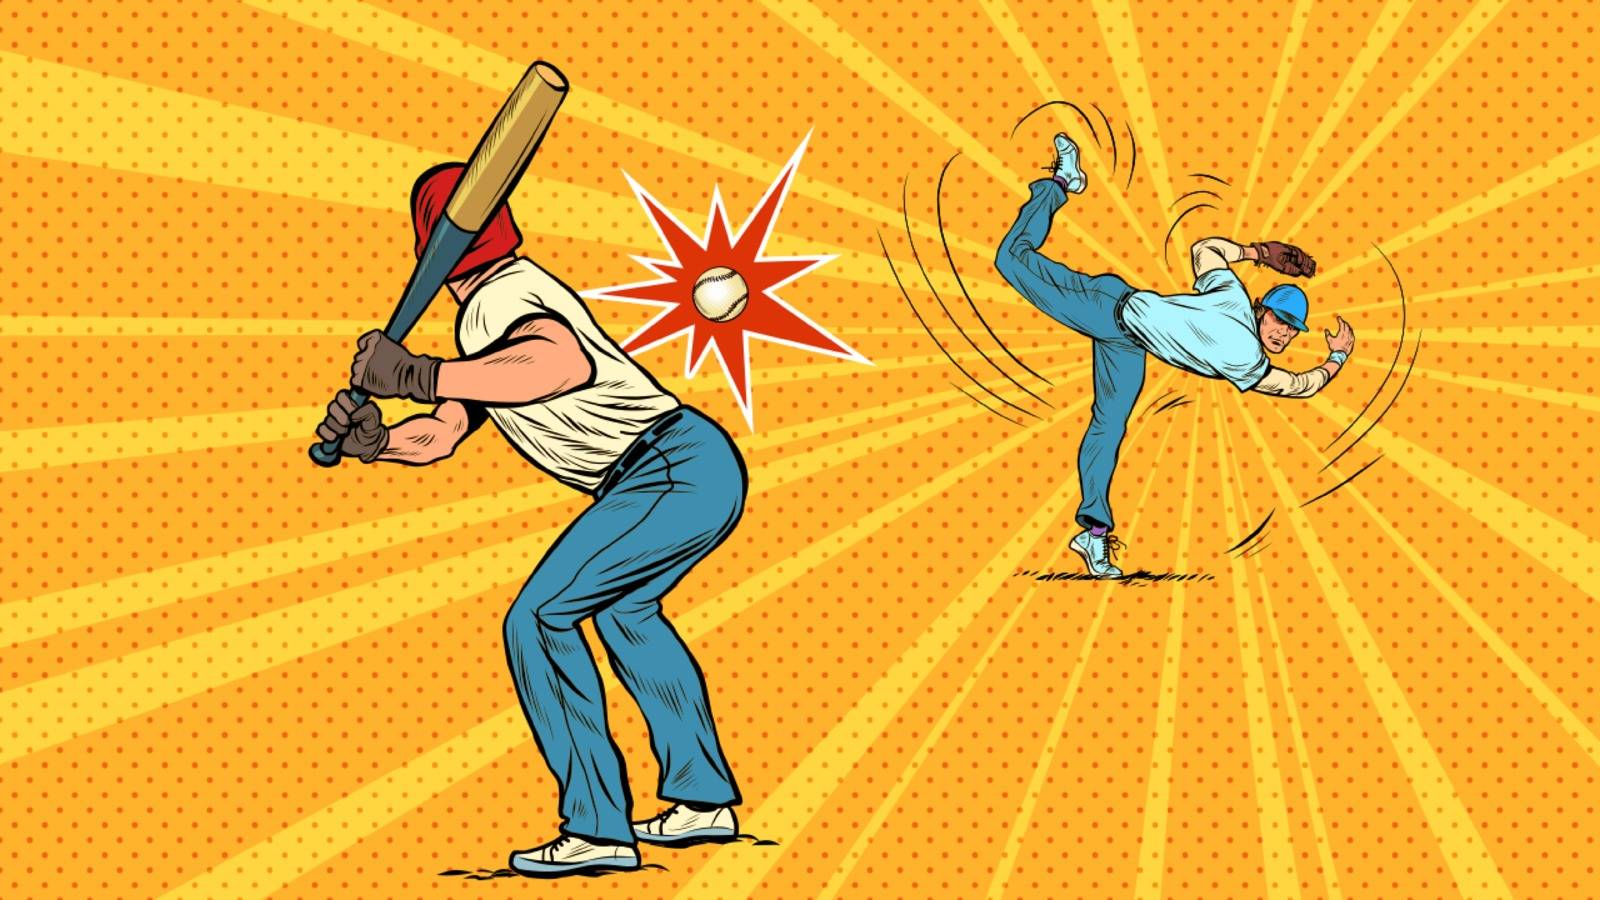 Game of baseball. The pitcher throws the ball. Pop art retro vector illustration 50s 60s style